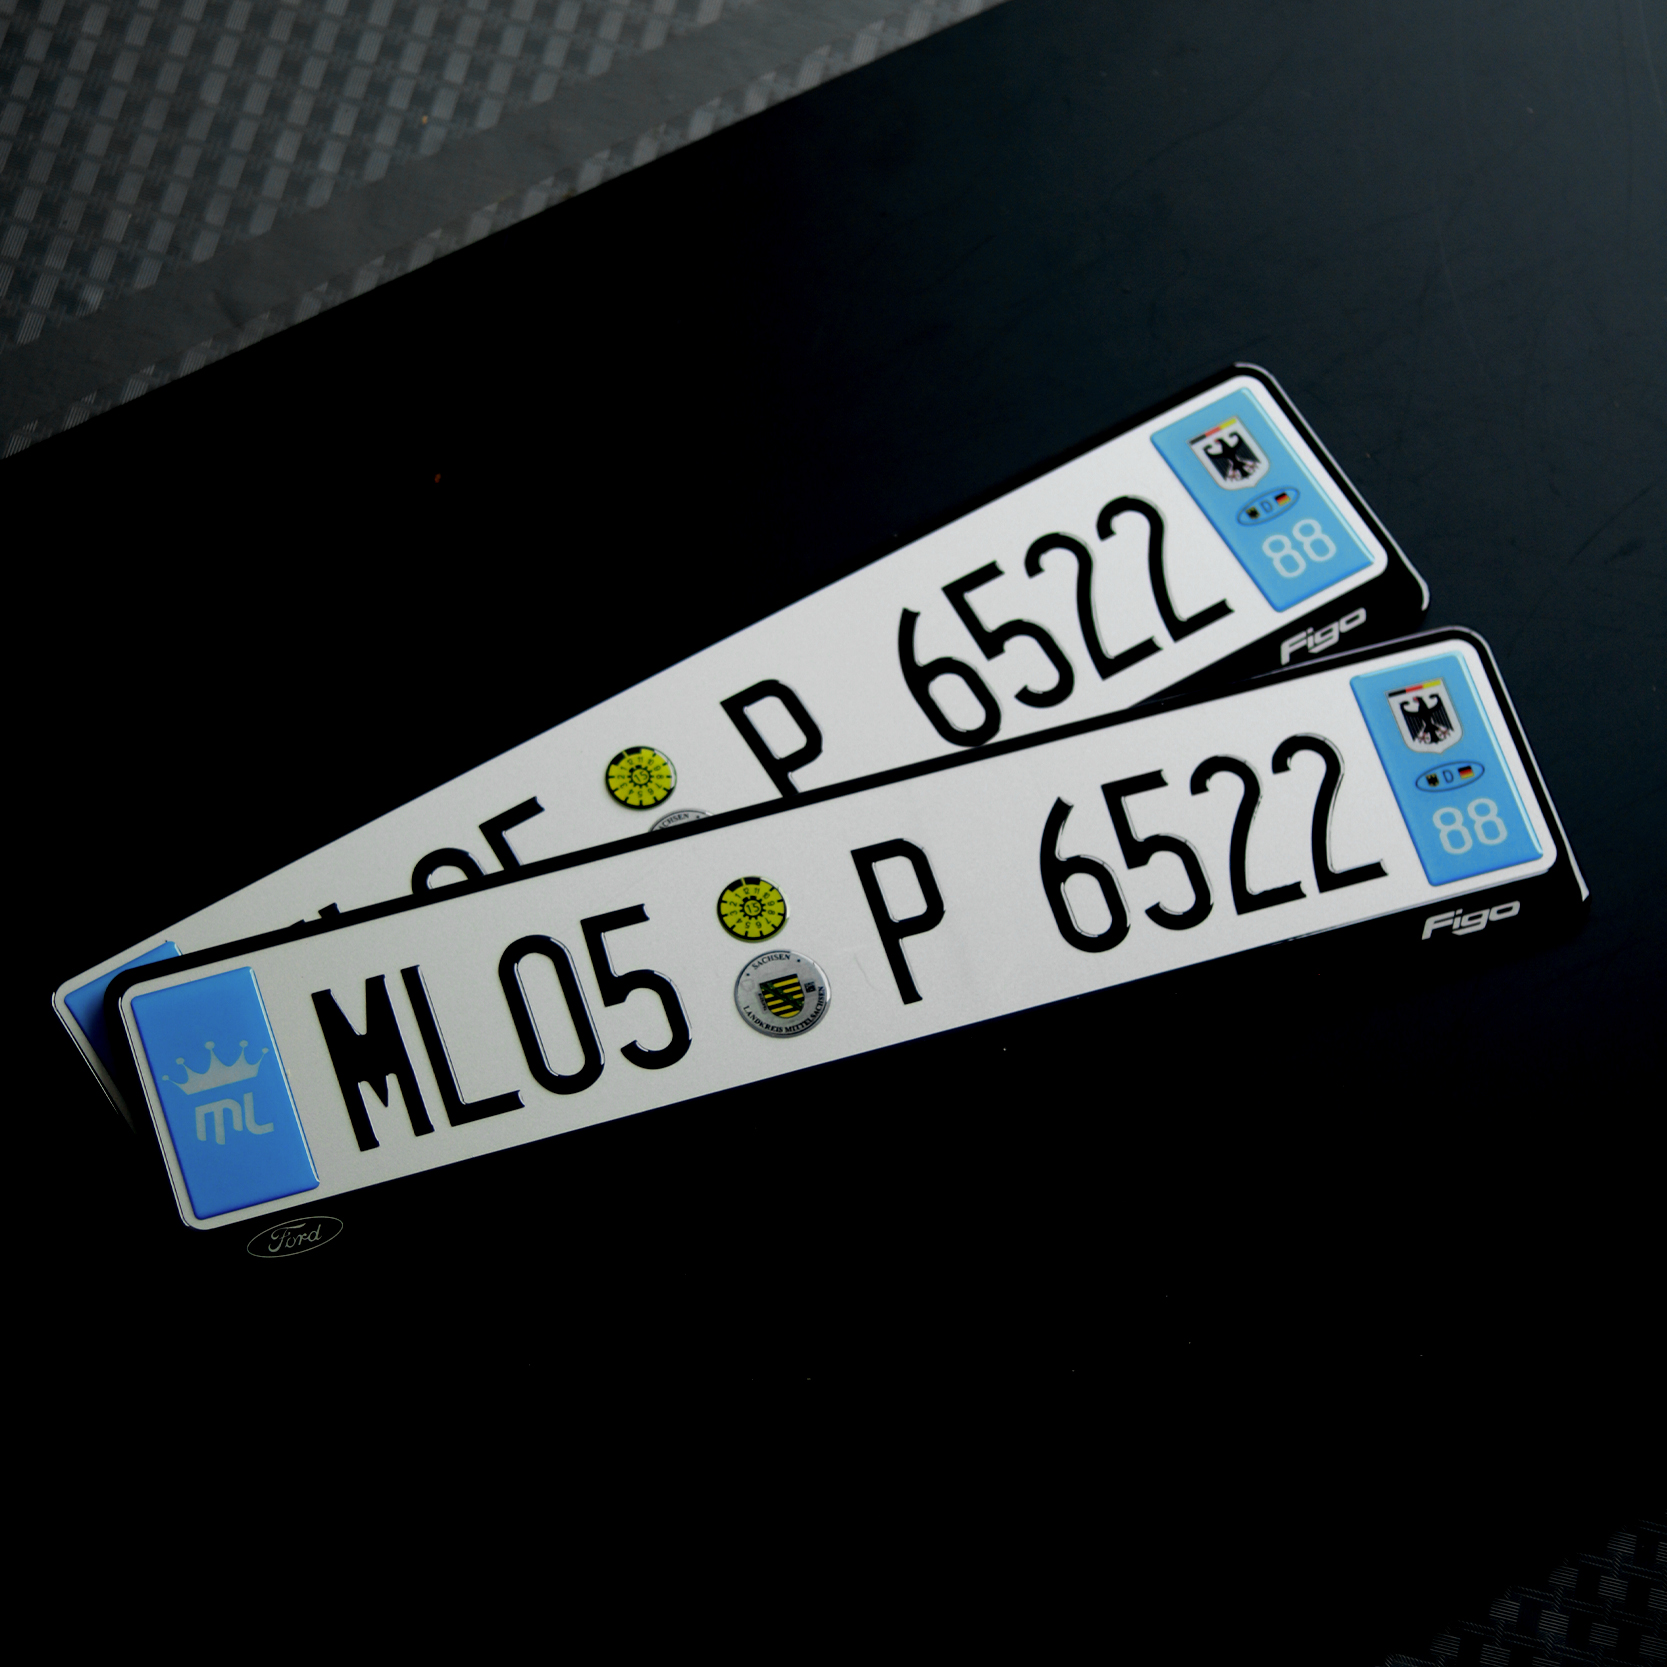 car number plate fancy designs clipart